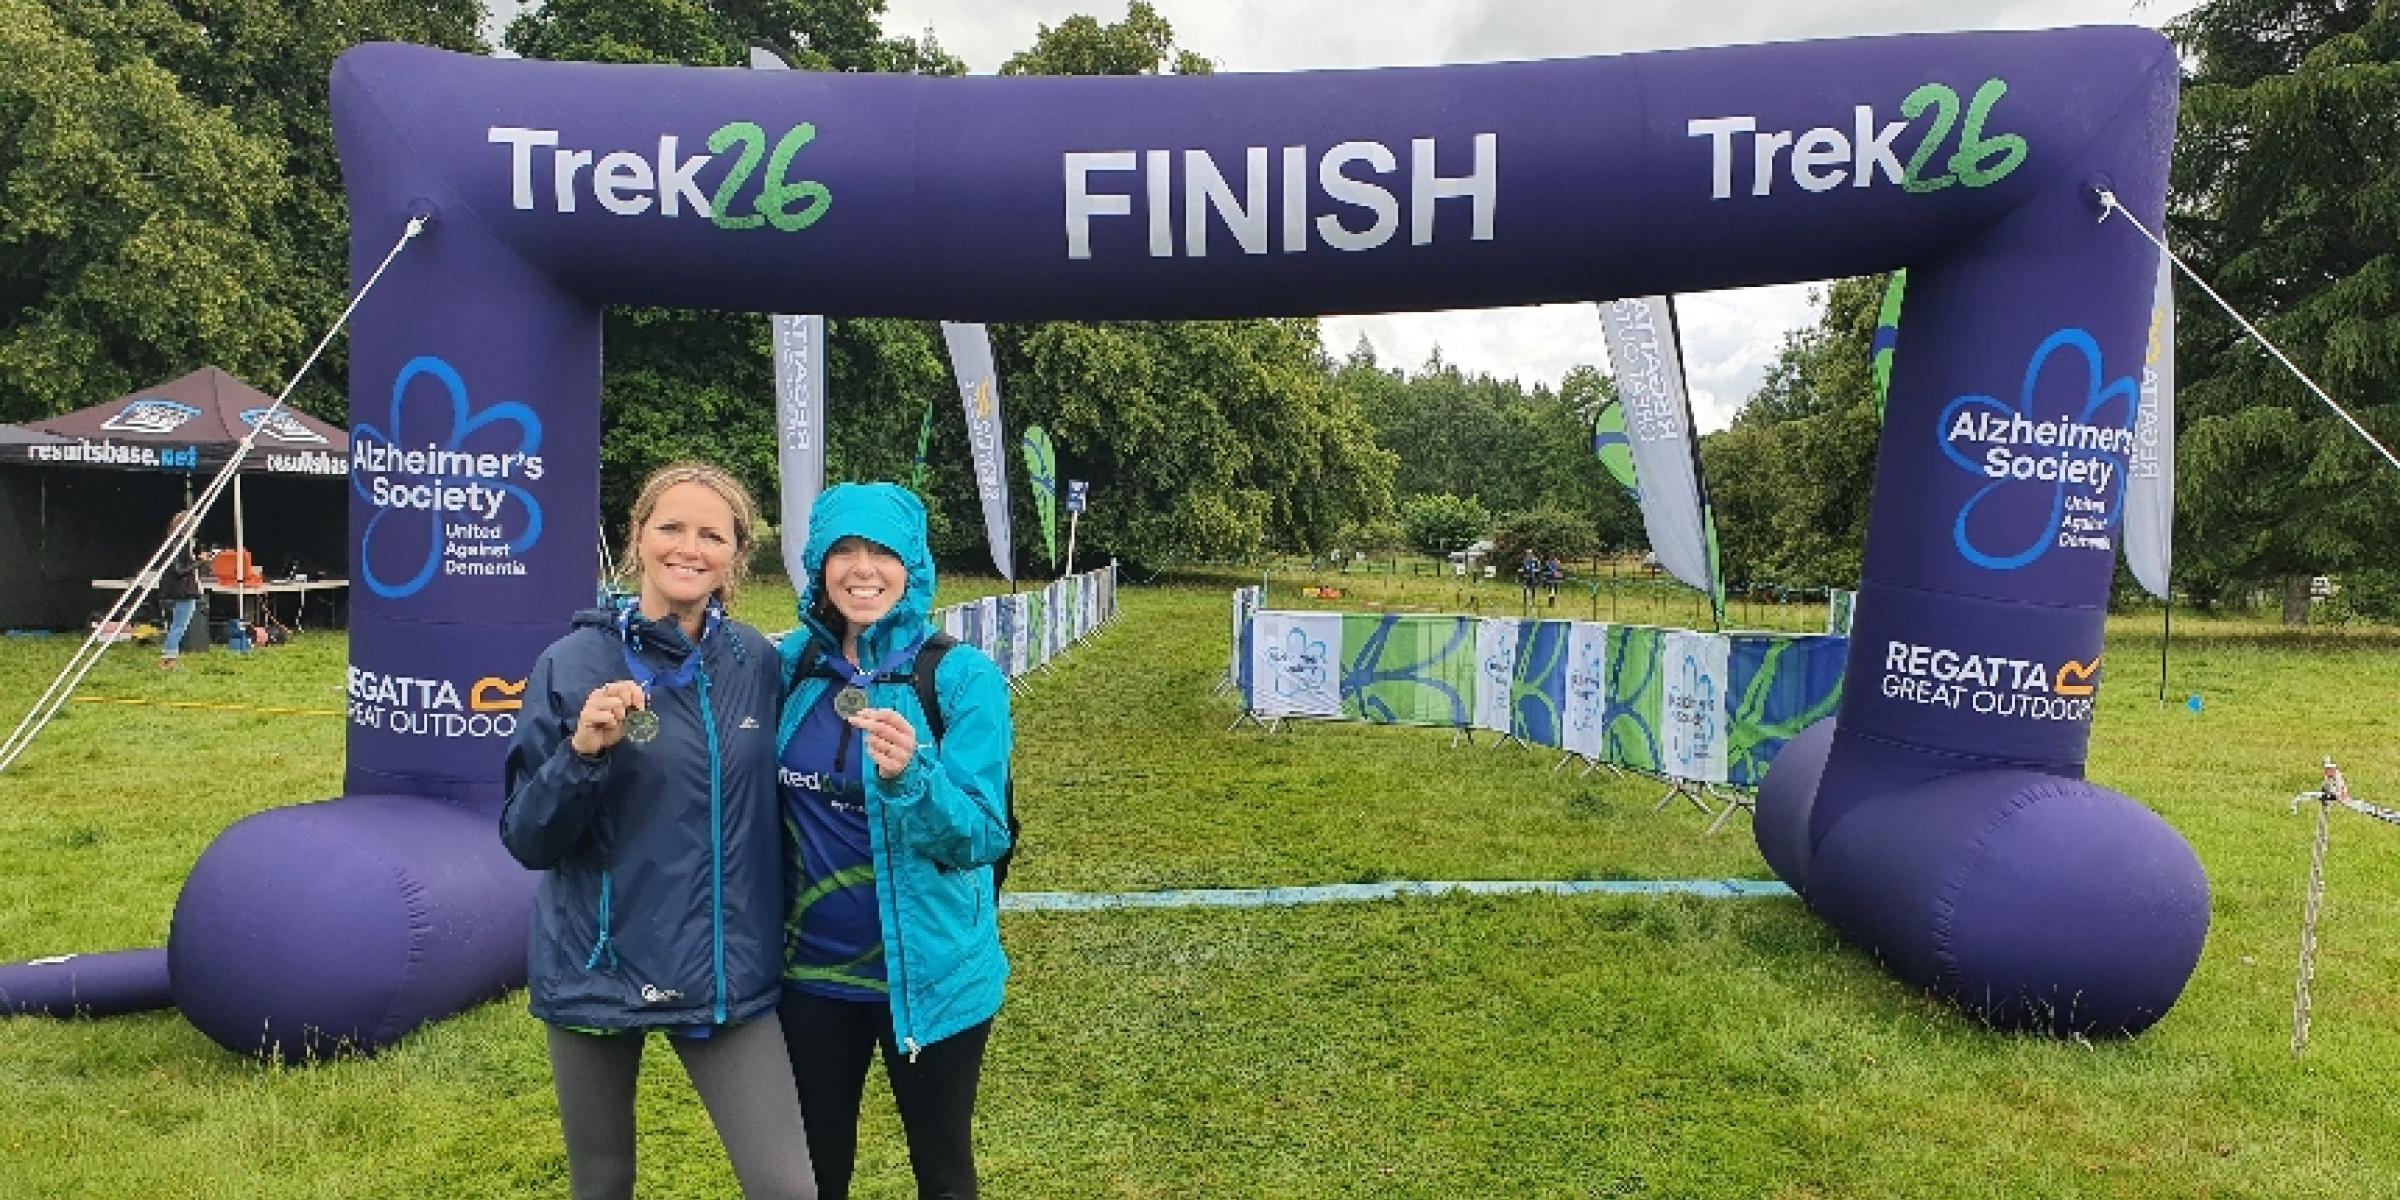 Julie and Karen under an inflatable arch that says 'Finish' at a Trek26 holding their medals